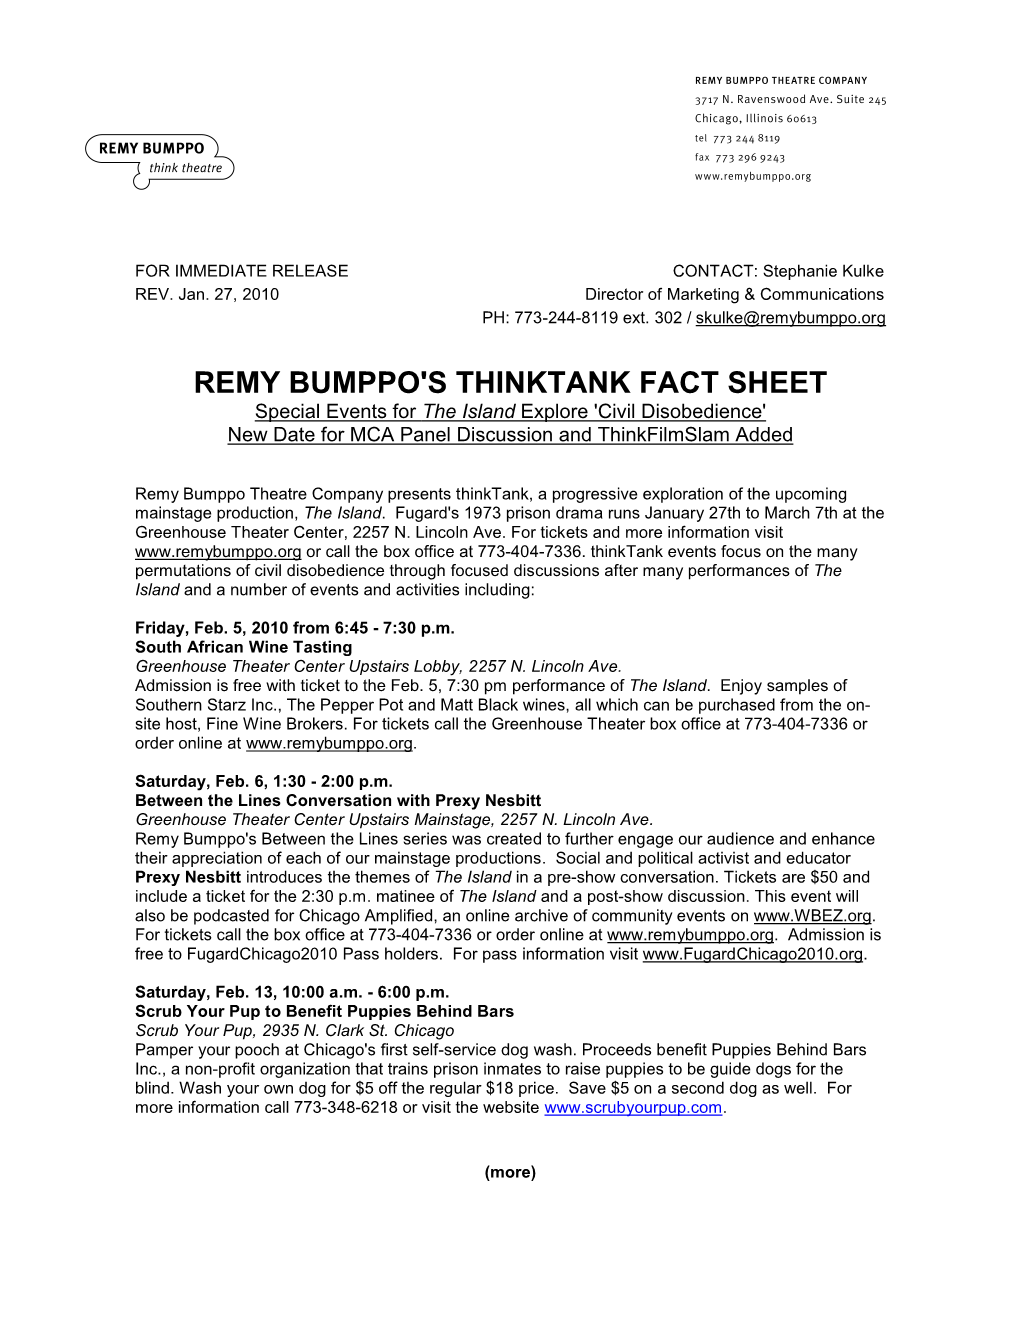 REMY BUMPPO's THINKTANK FACT SHEET Special Events for the Island Explore 'Civil Disobedience' New Date for MCA Panel Discussion and Thinkfilmslam Added